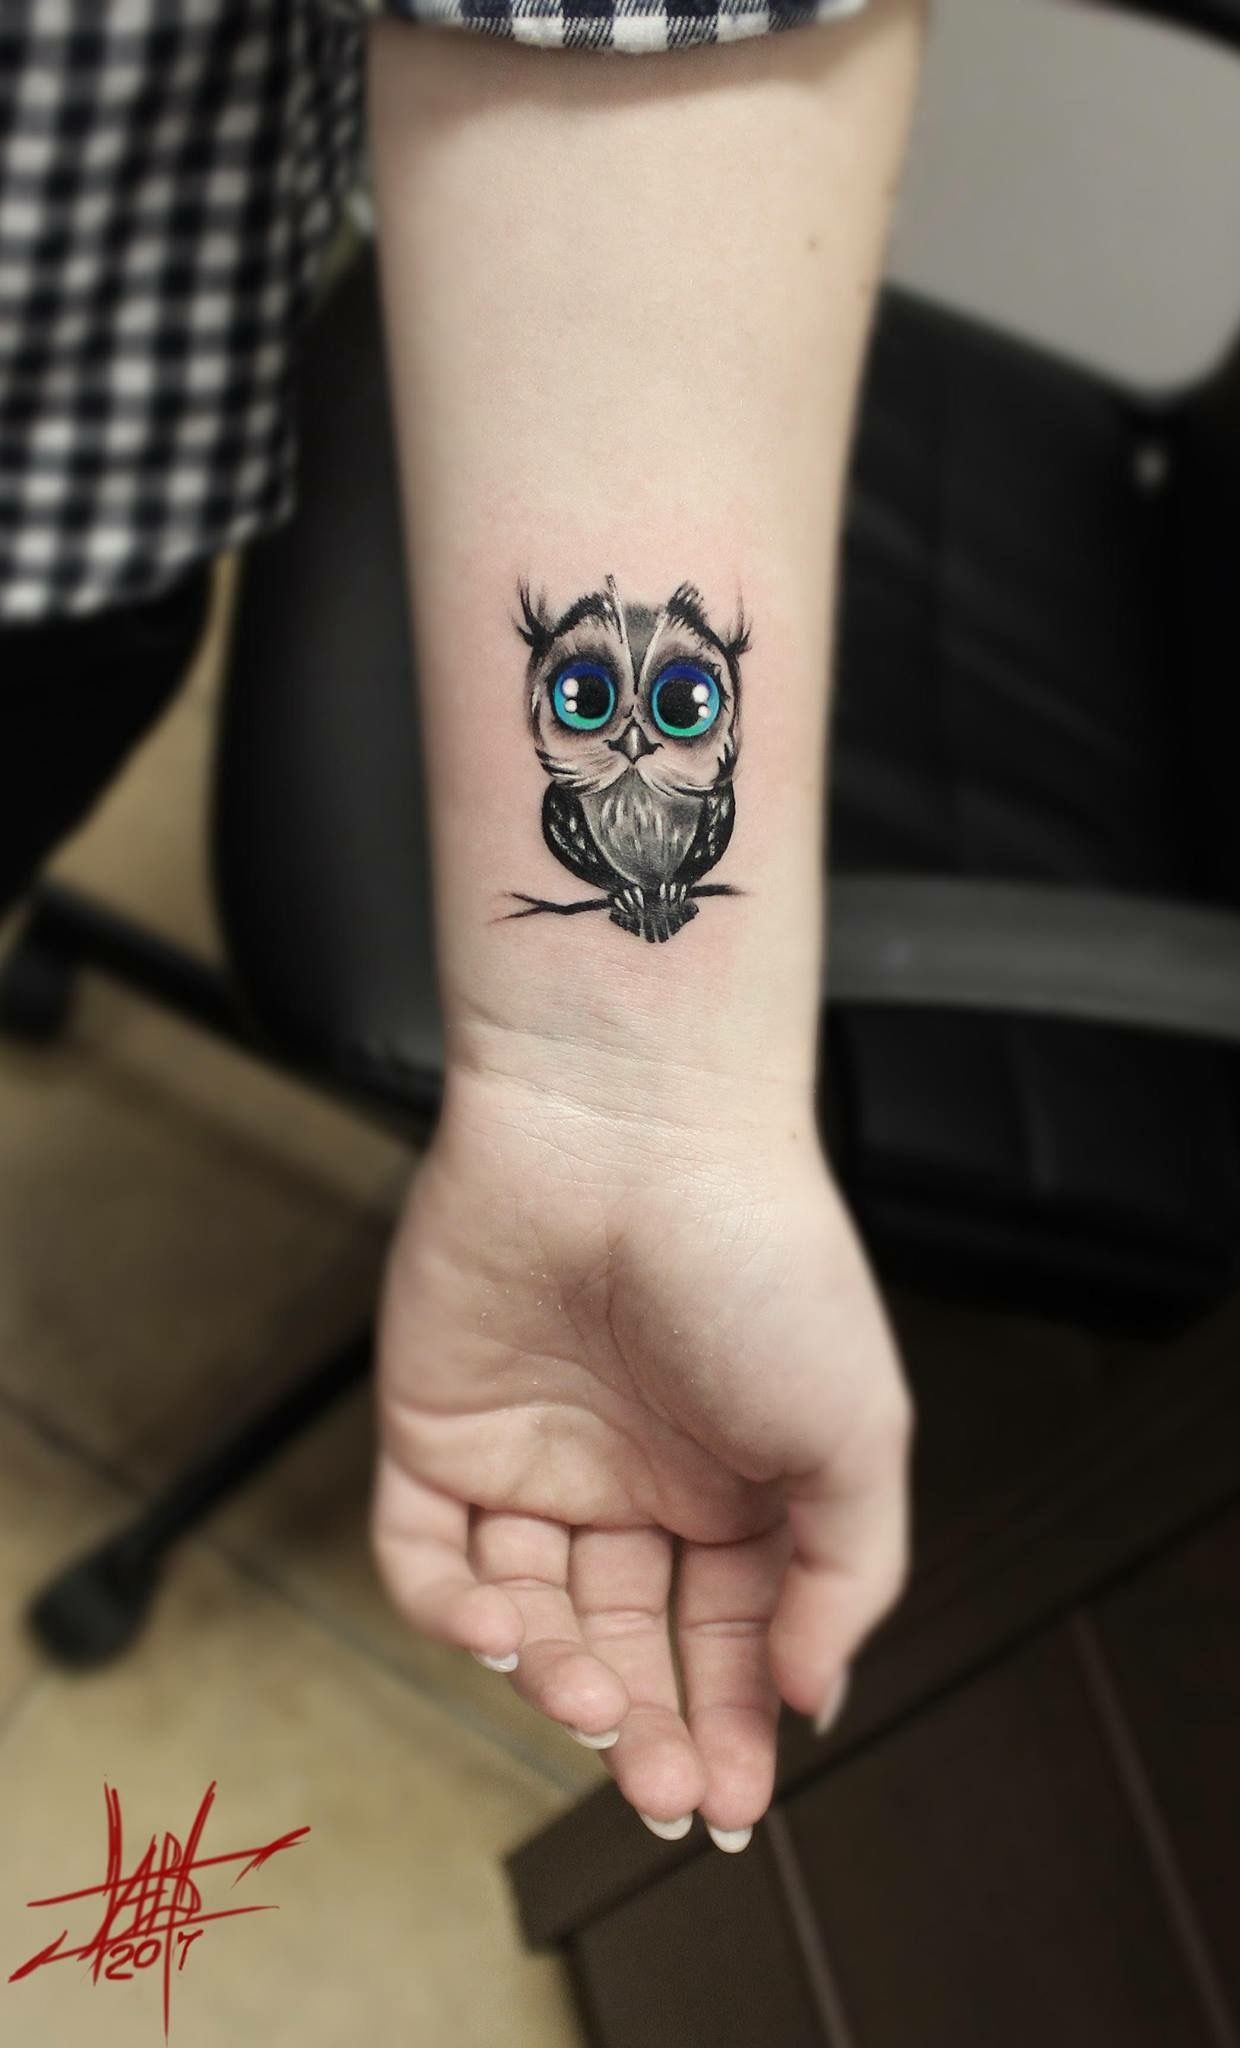 Incredible Colorful Eyed Cute Little Grey Owl Tattoo On Forearm